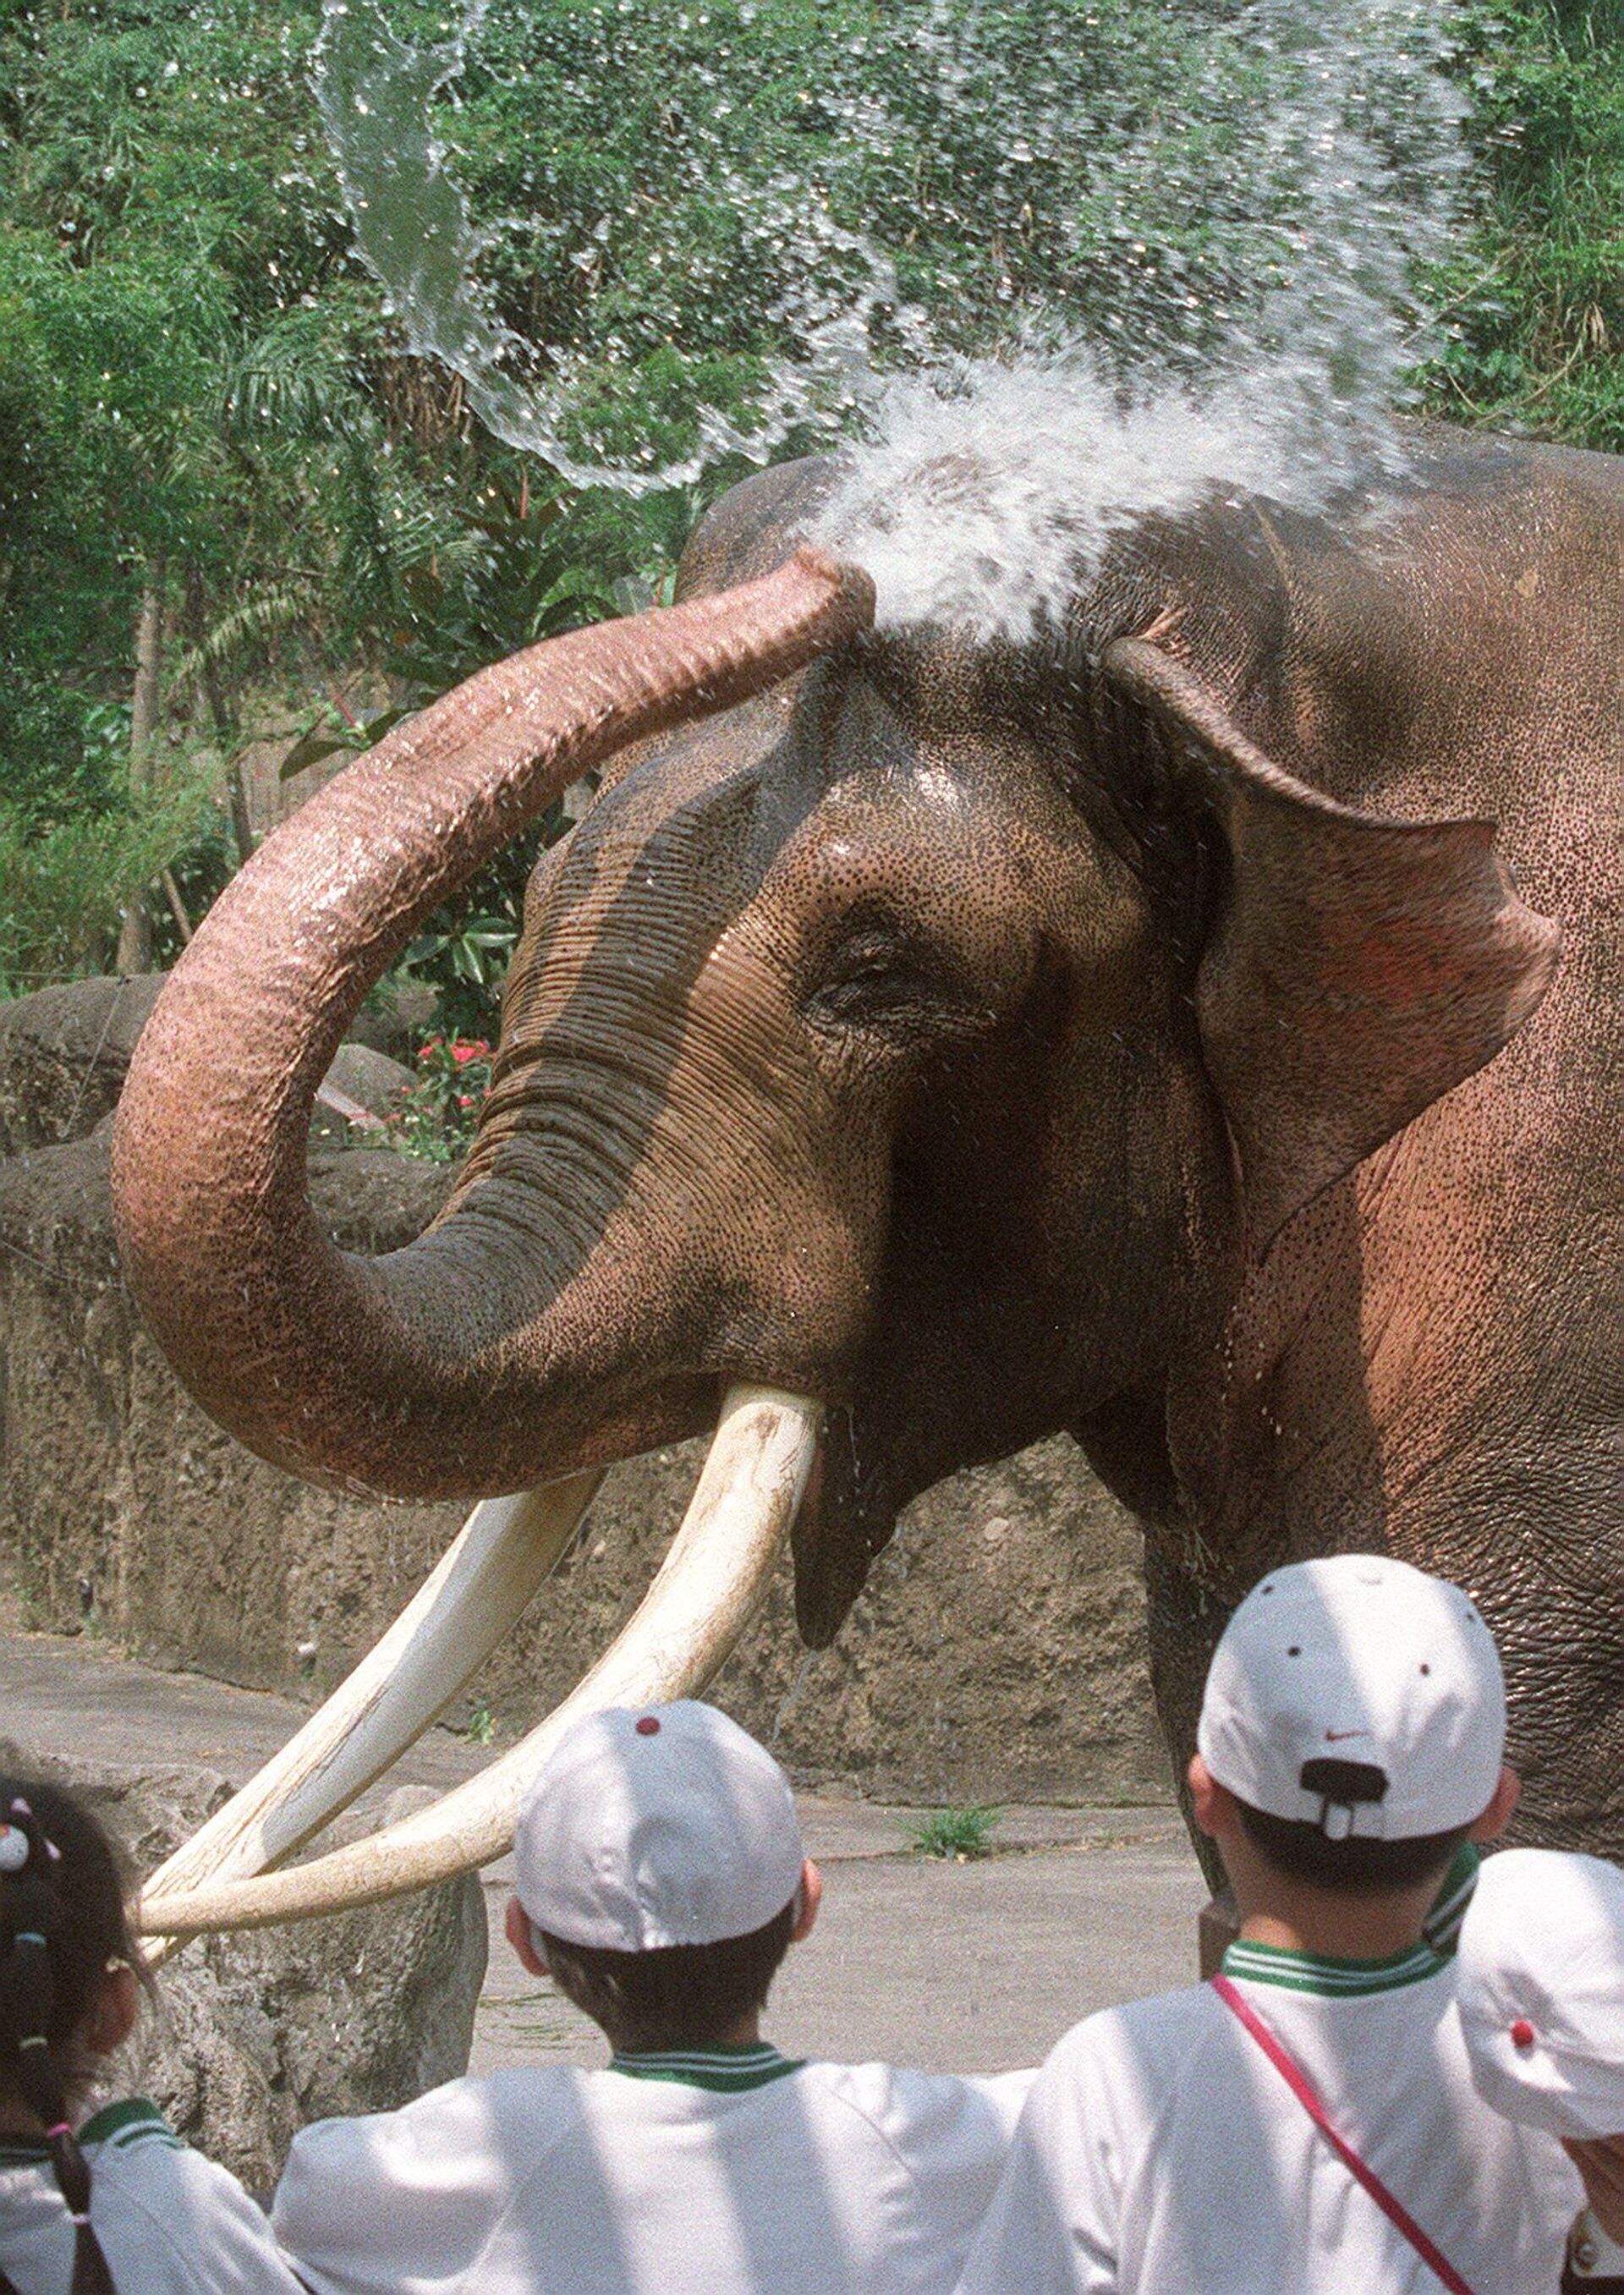 The 82-year-old elephant called Lin Wang splashes water to cool itself while a group of children looks at Taipei's Mucha Zoo 19 April, 2000.  - Sputnik Africa, 1920, 12.08.2023